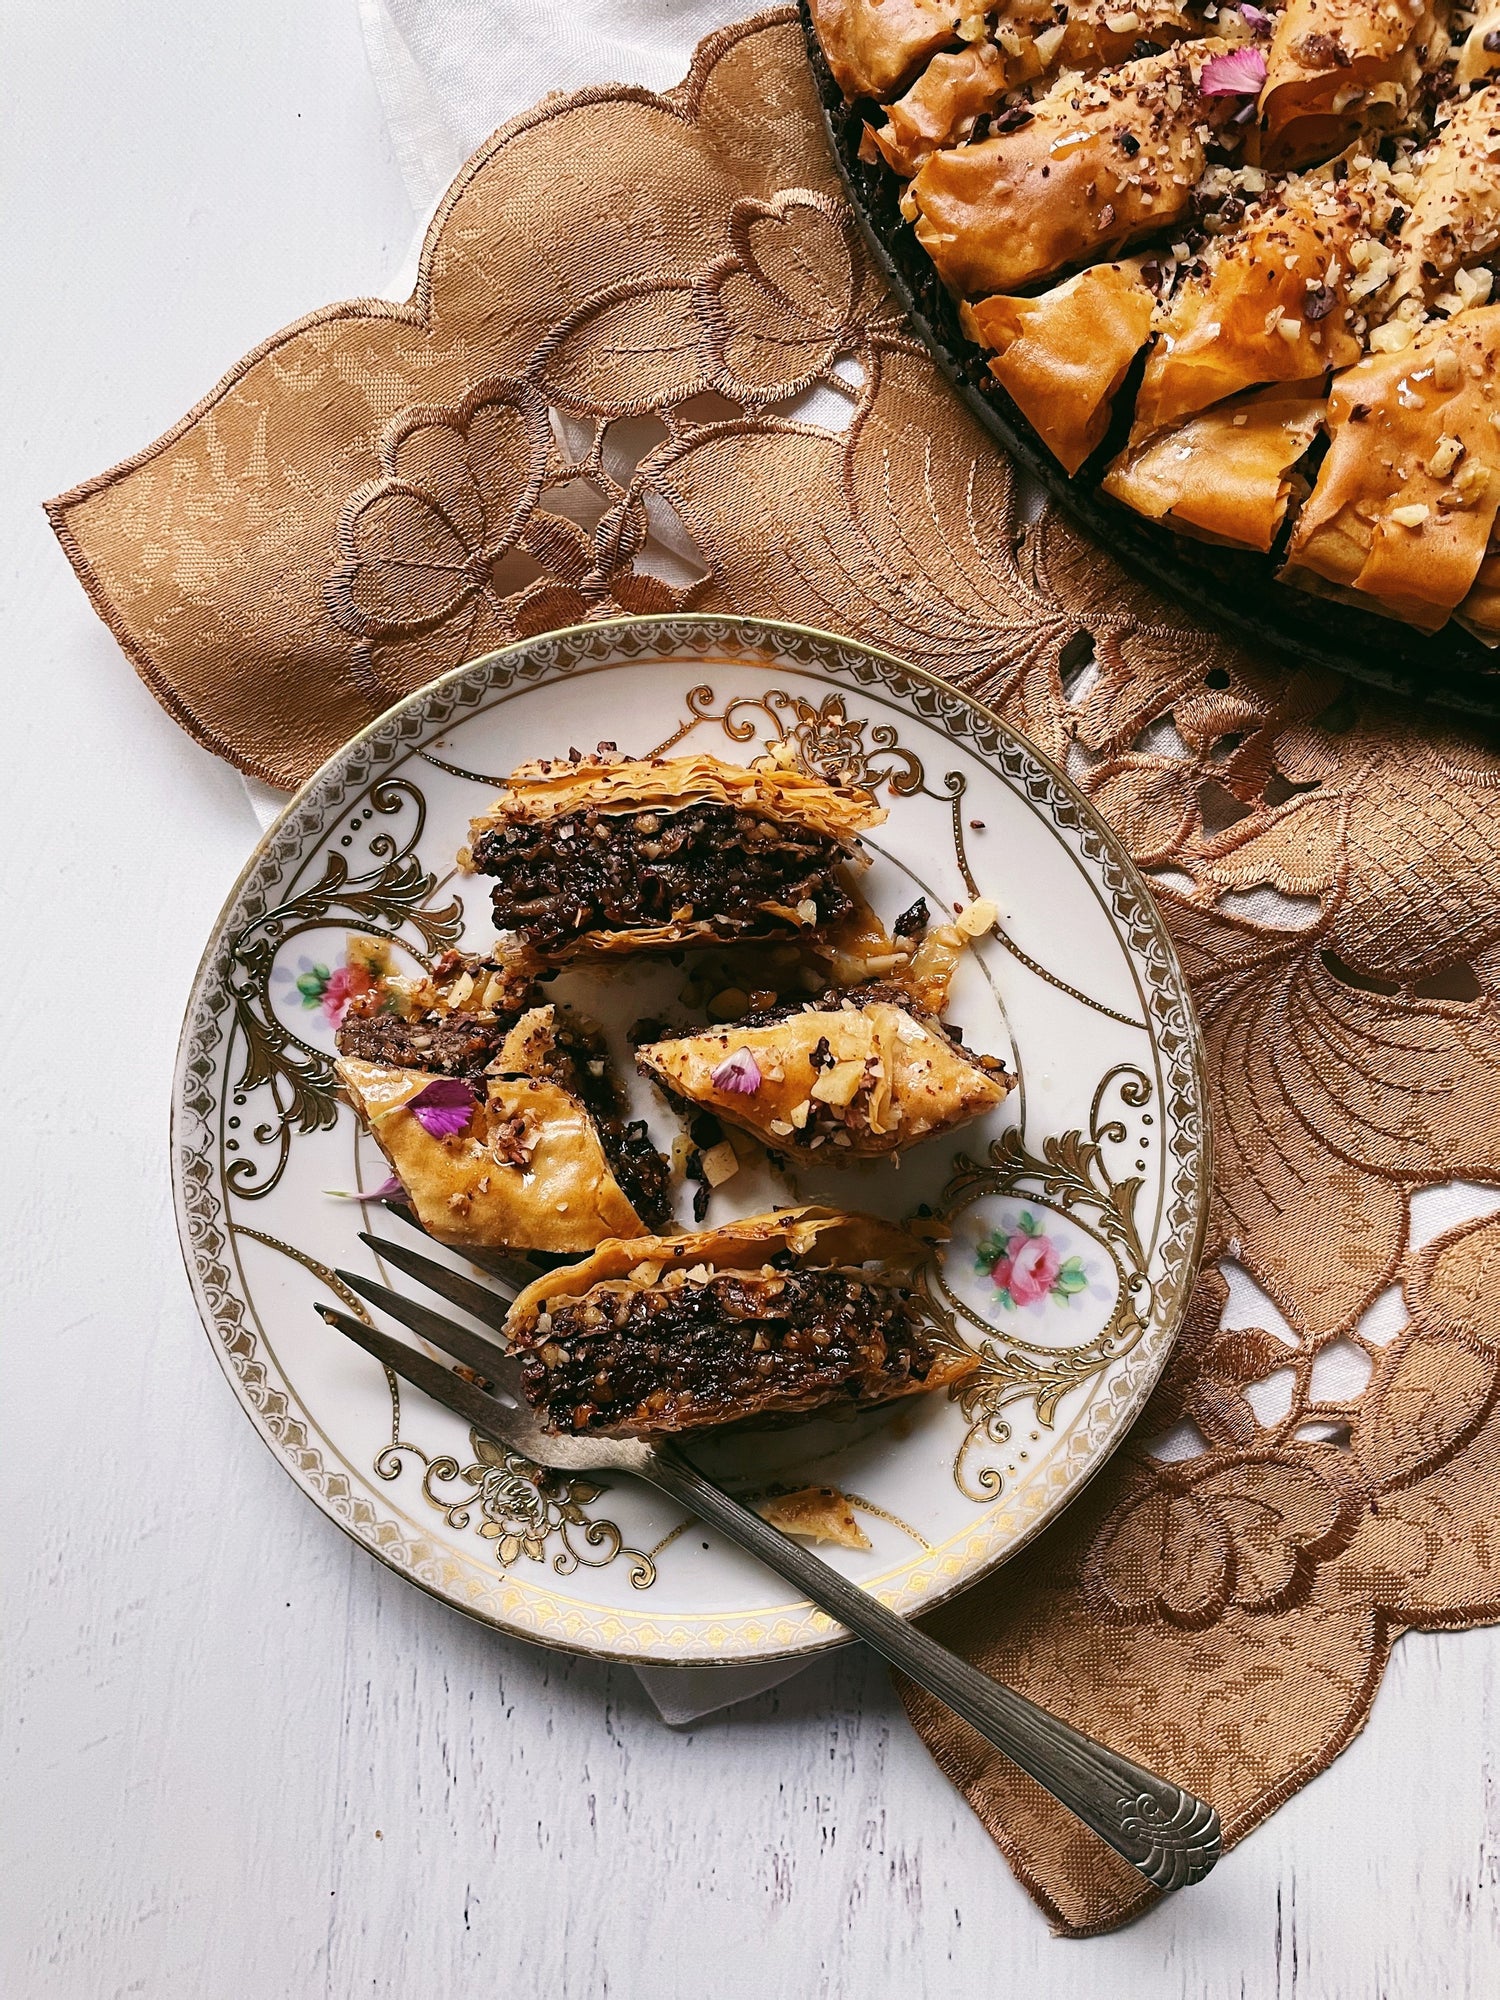 Olive Oil Baklava with Walnuts and Dark Chocolate